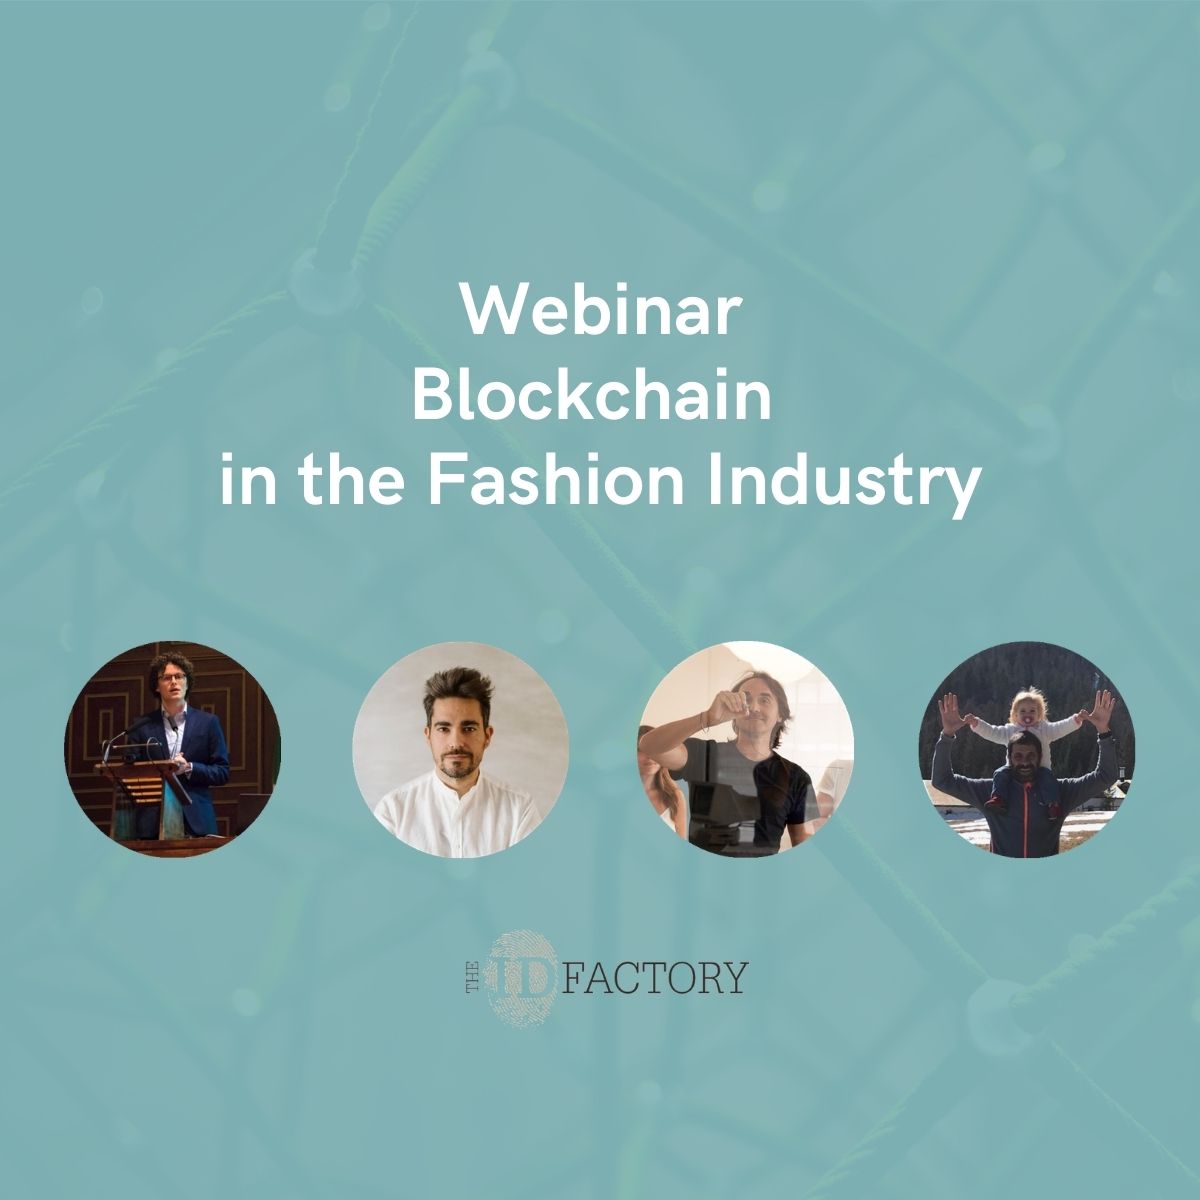 blockchain technology in the fashion industry